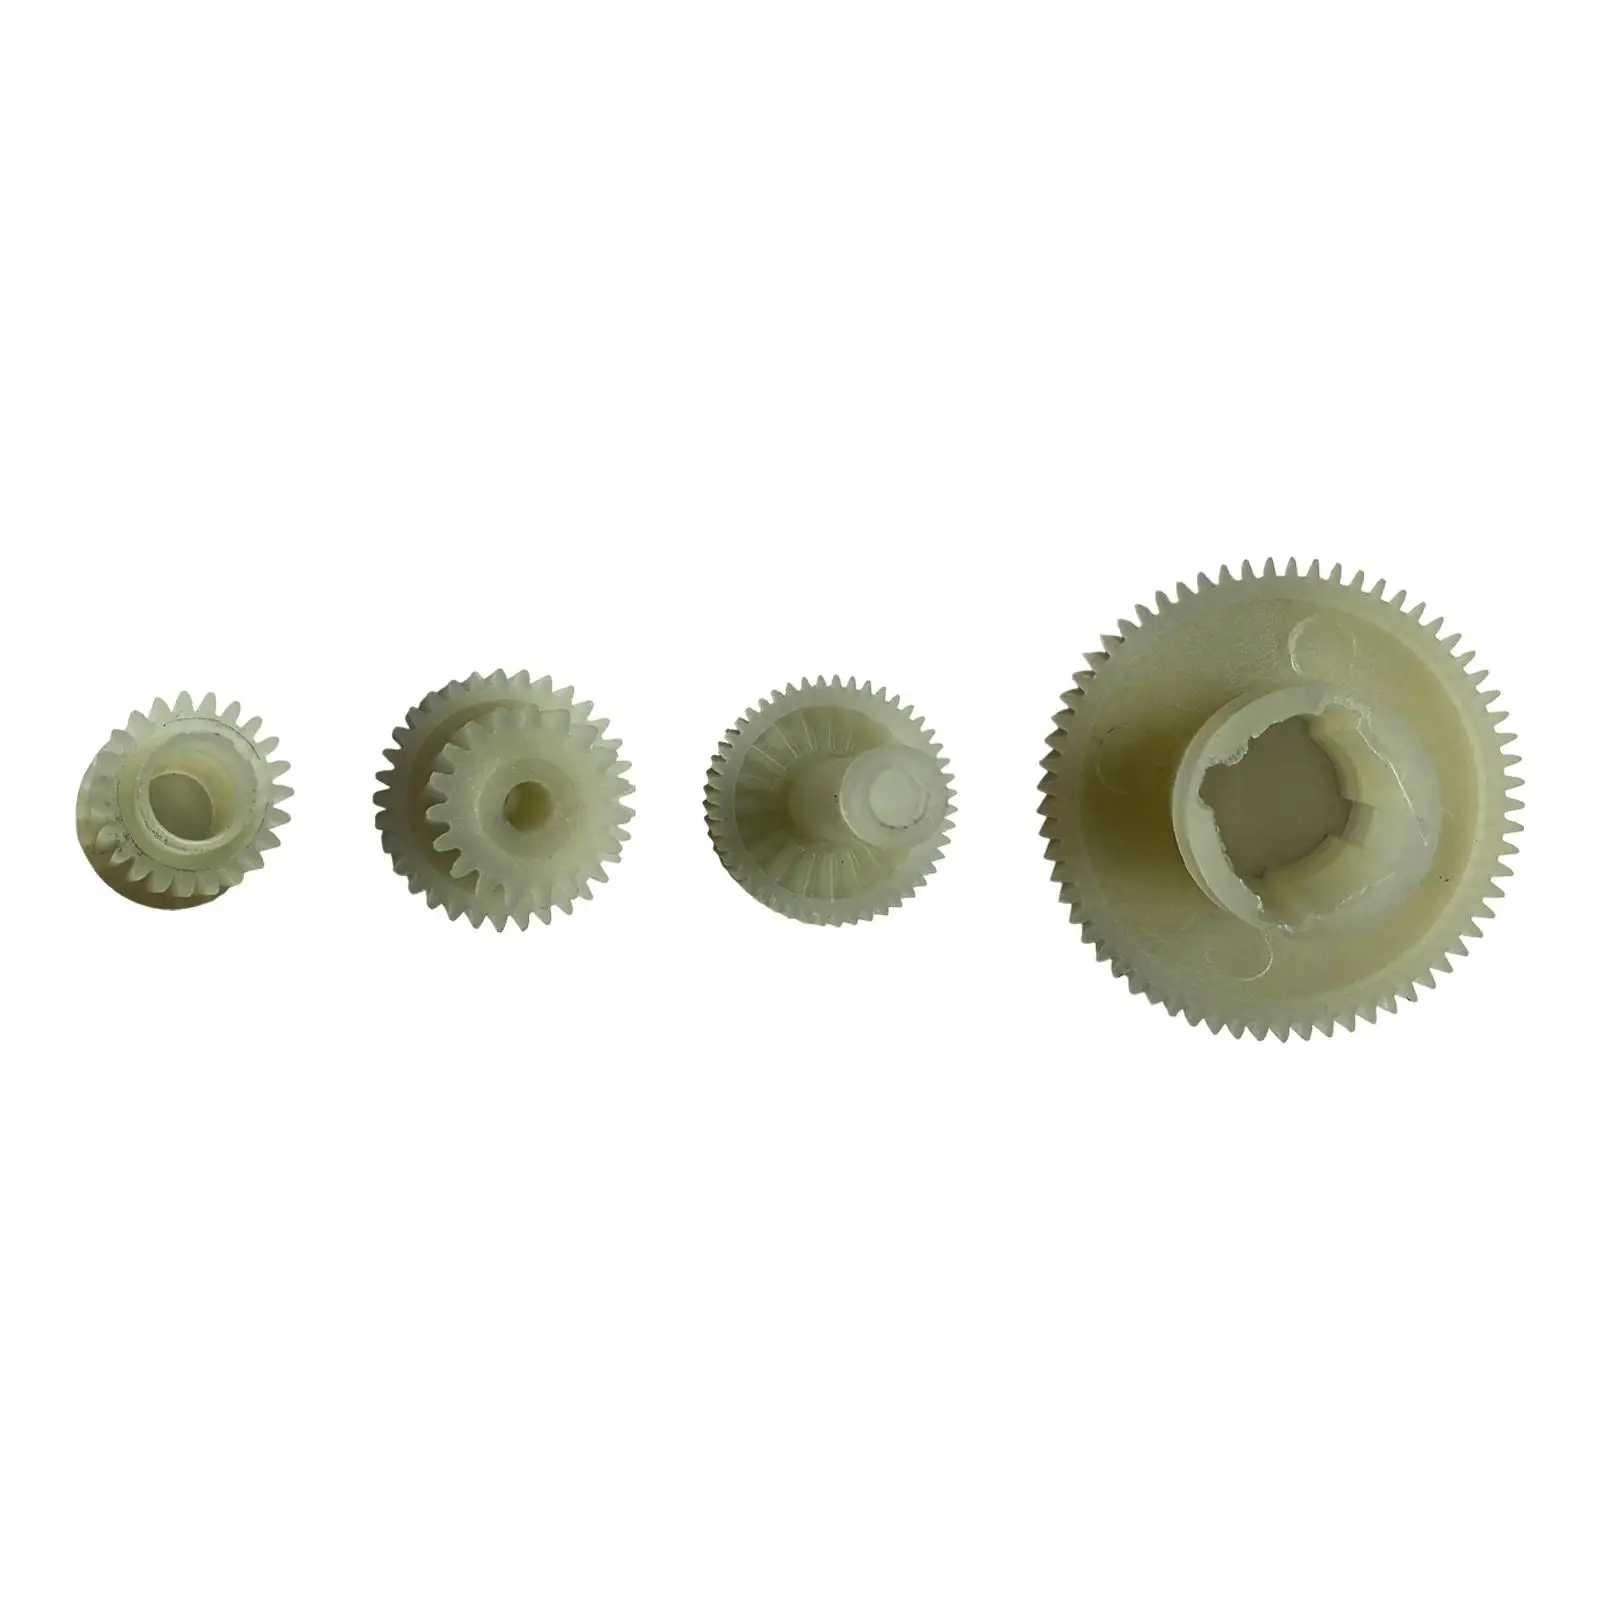 Parking Brake Actuator Repair Gears Easy Installation High Performance Accessory for Land Rover Discovery 3 4